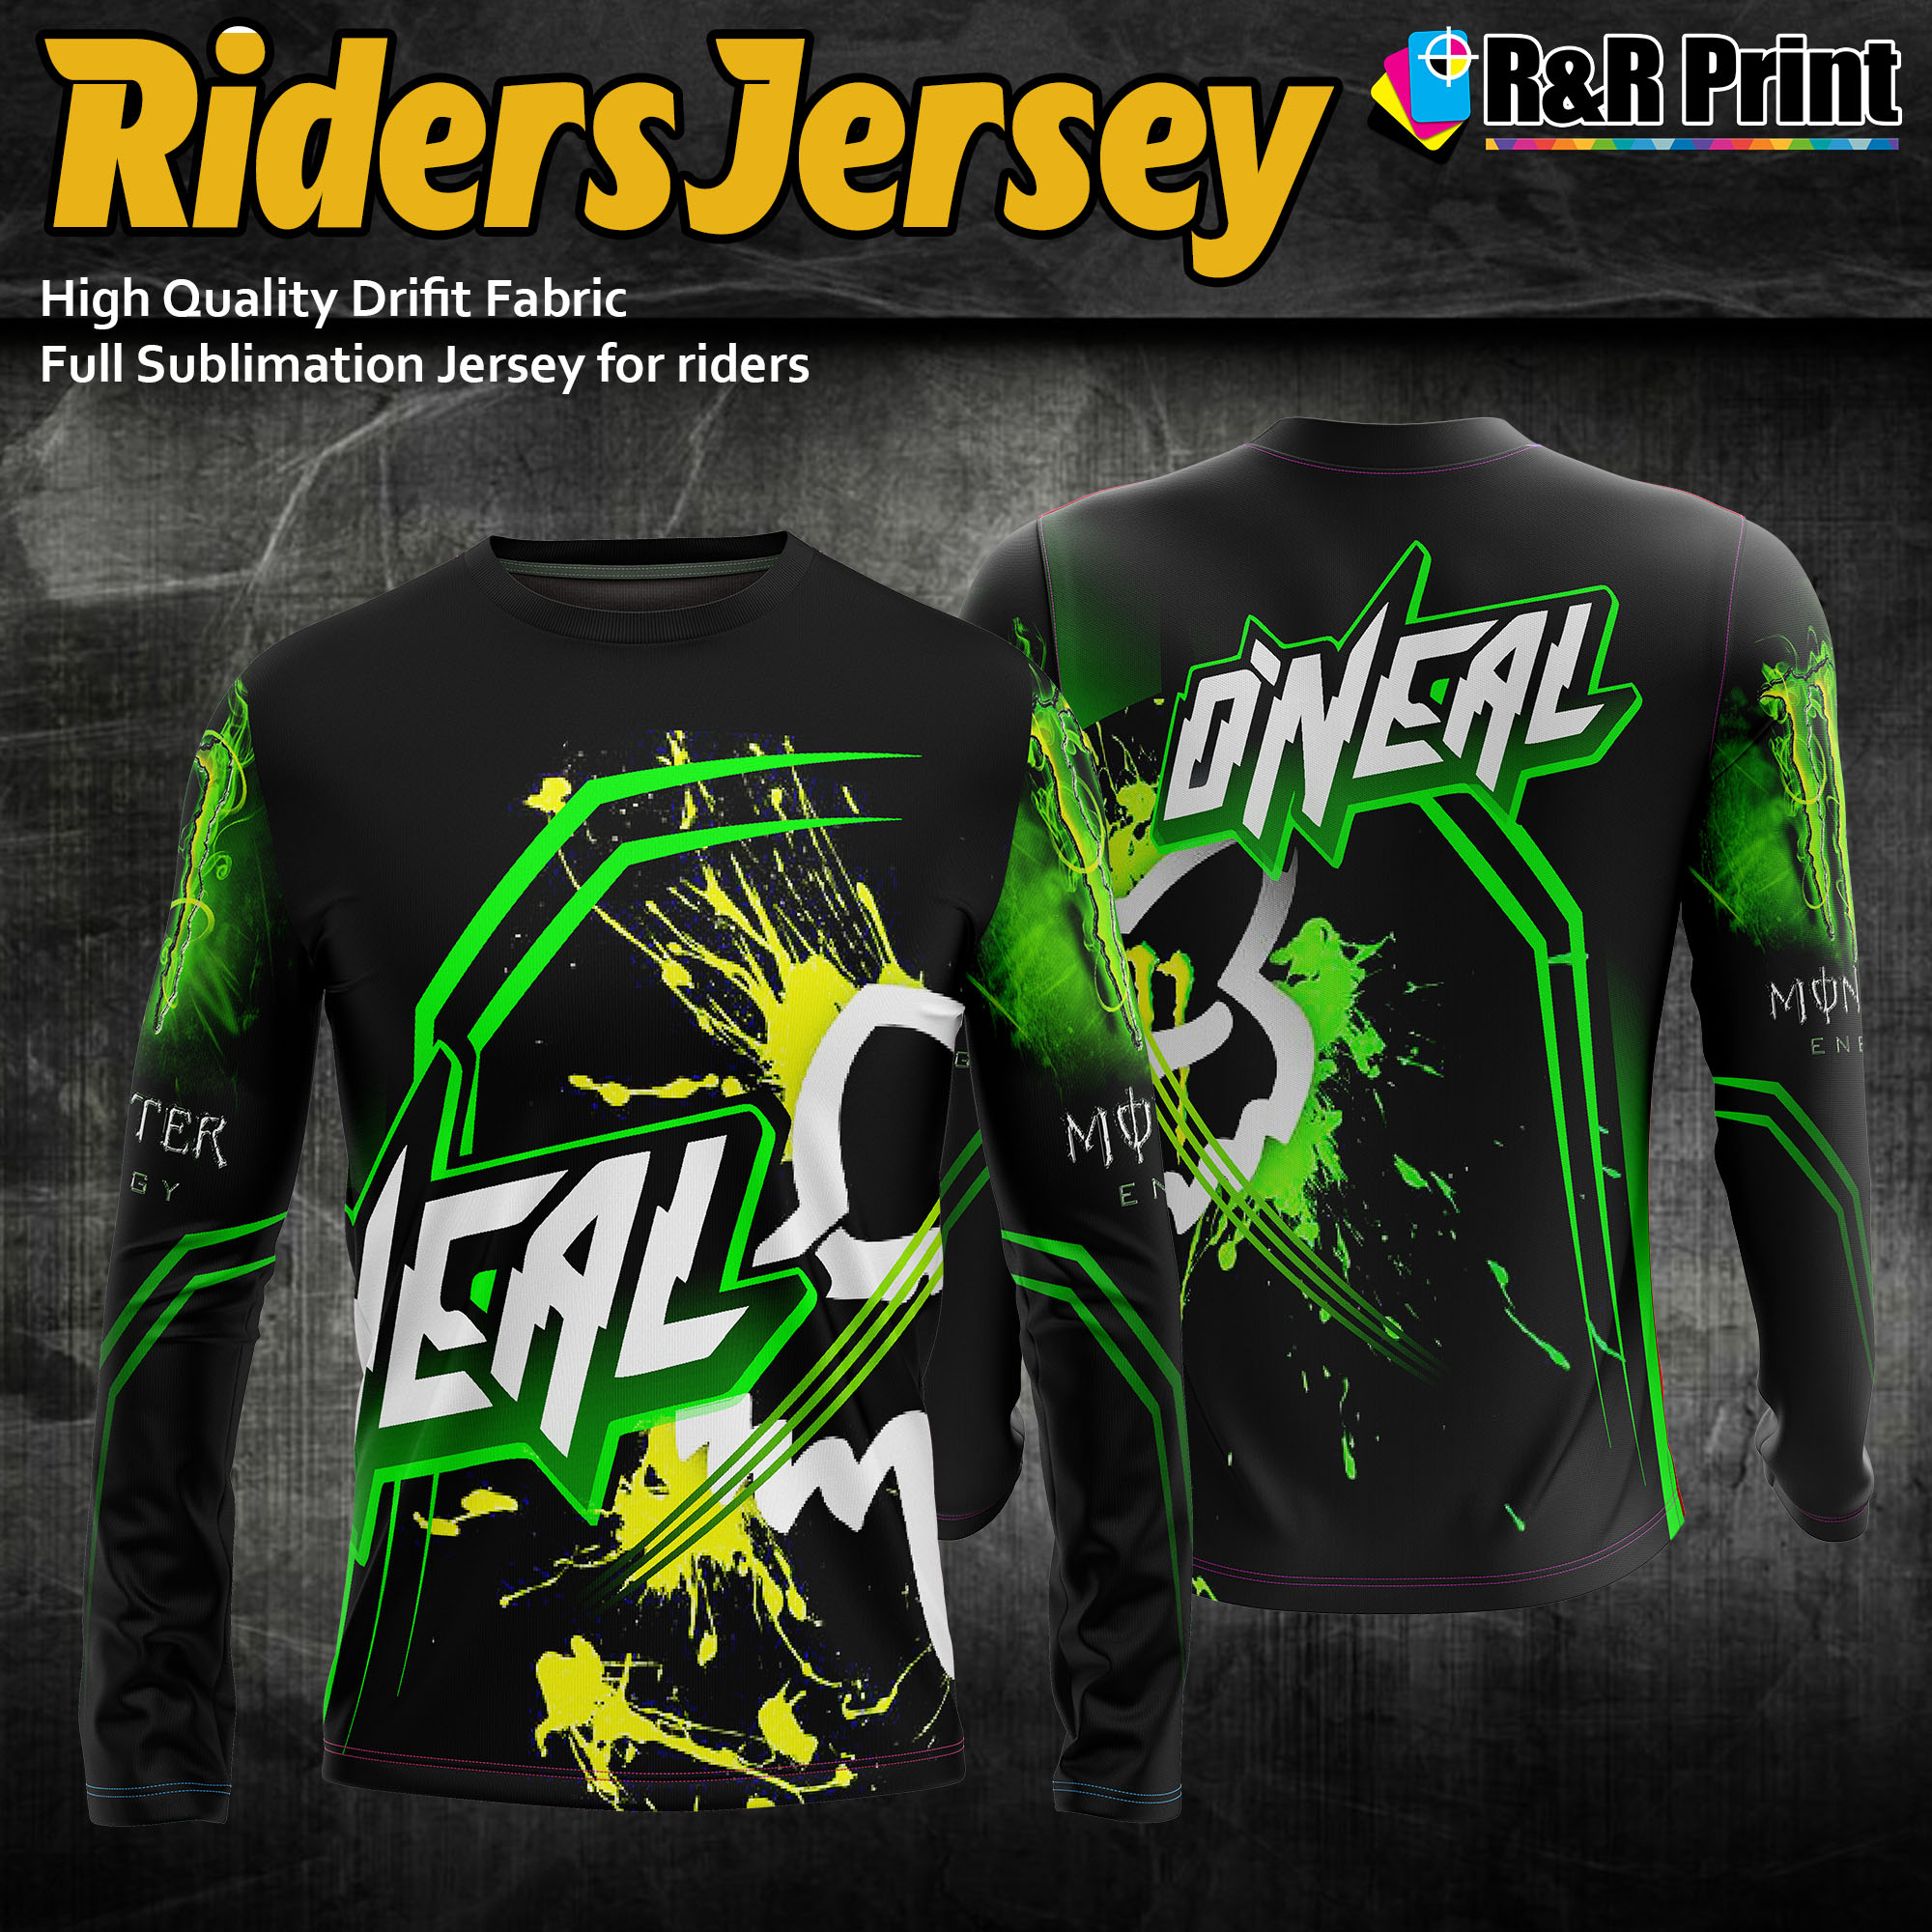 Long Sleeves Full Sublimation Jersey Shirt for Motorcycle Bike Riders ...